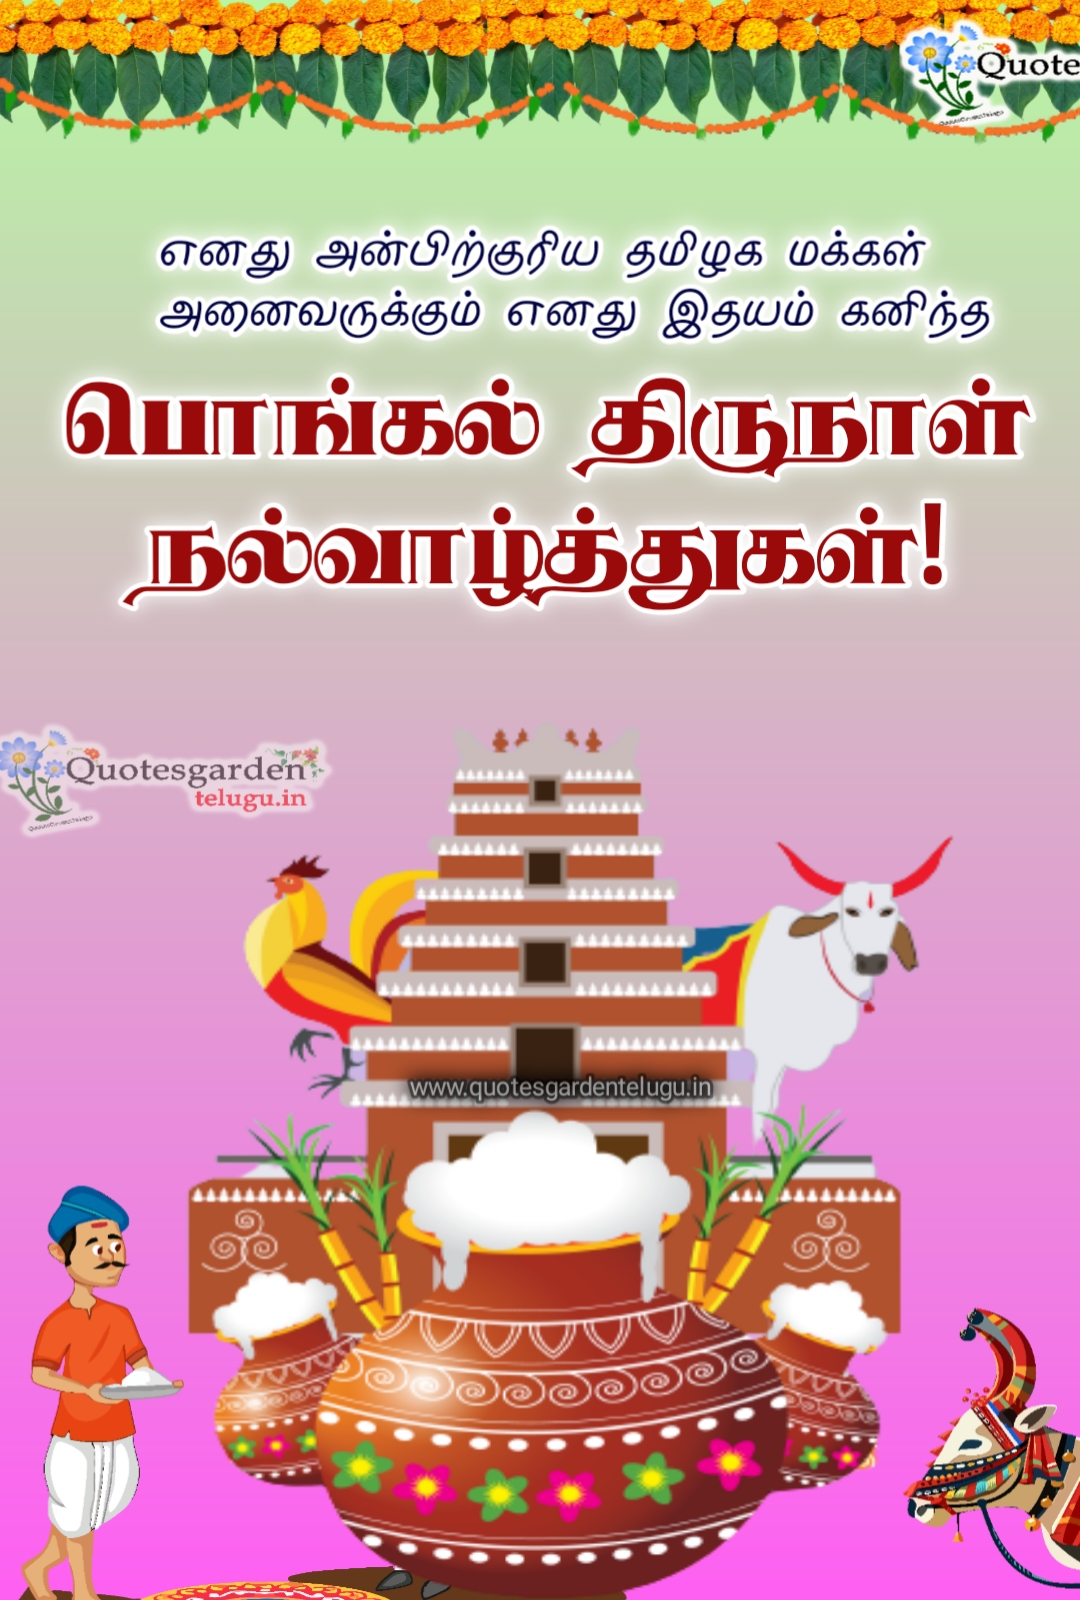 Pongal 2021 greetings wishes images in tamil quotes wallpapers ...